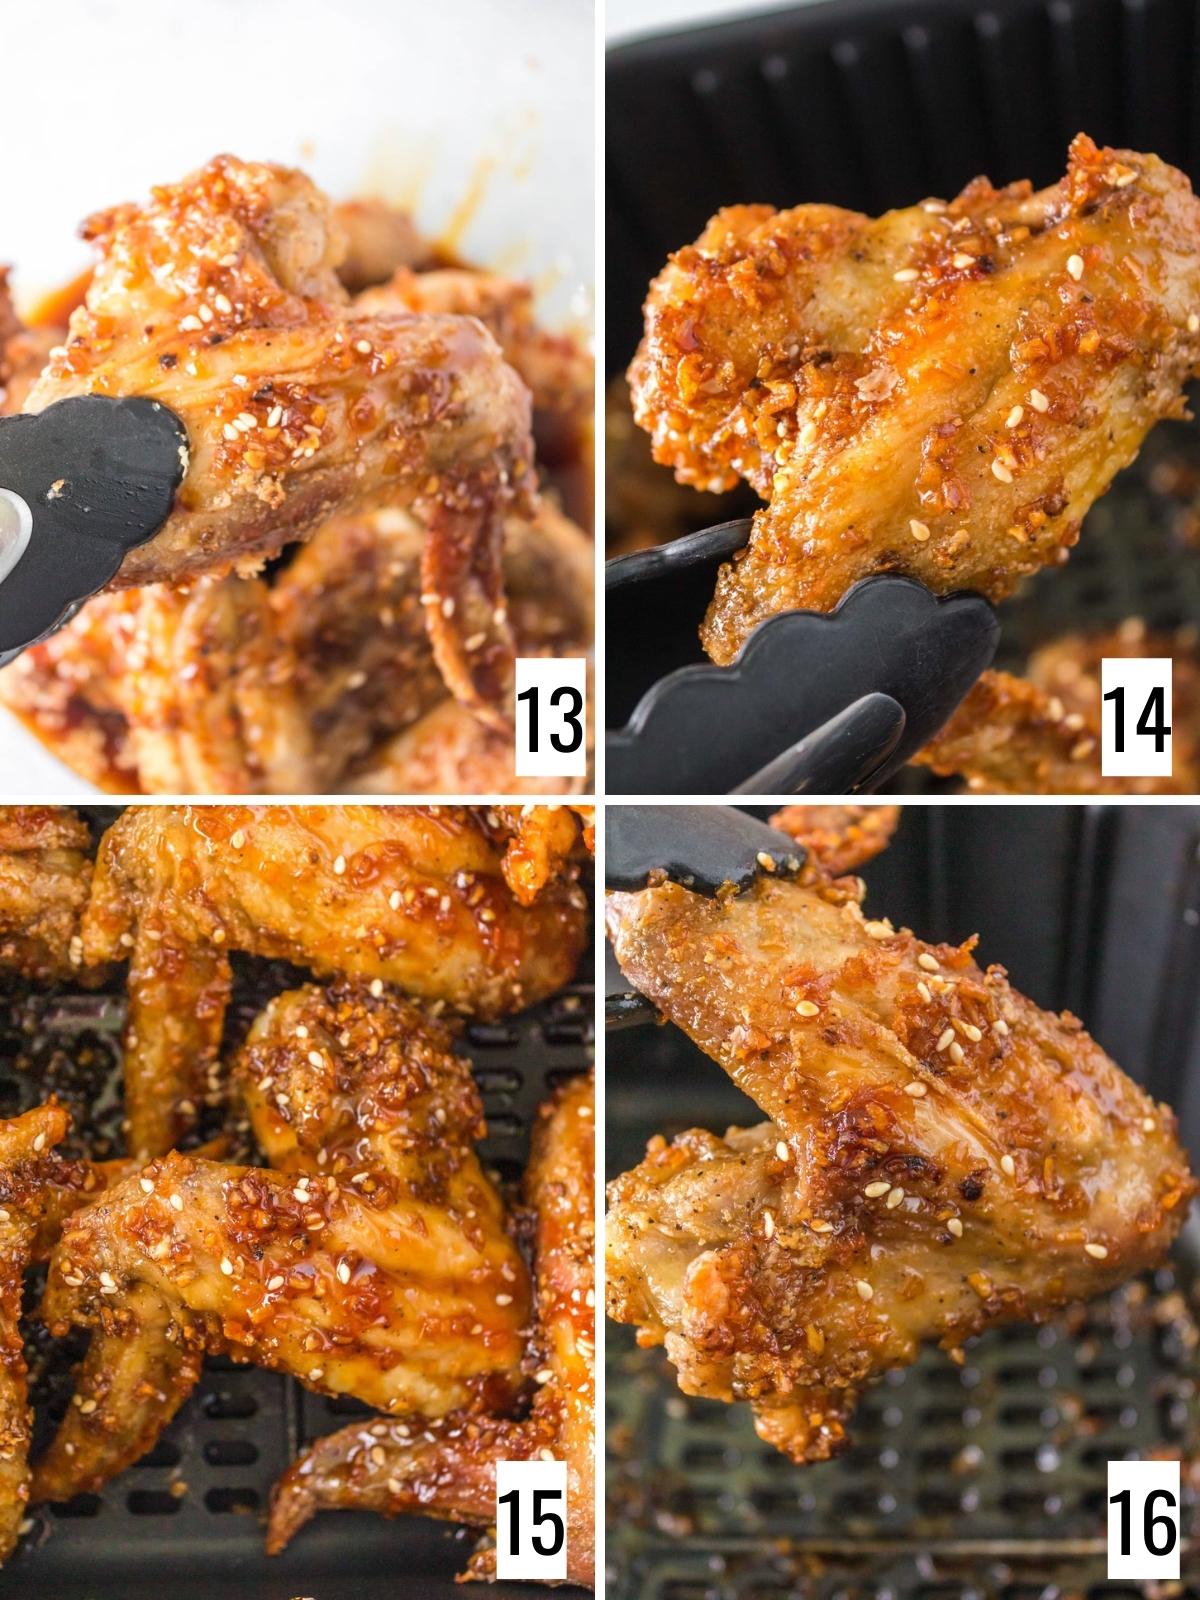 Step-by-step photos show tongs remove sauced wings from bowl, adding to air fryer, wings in bottom of air fryer, then tongs removing cooked wings.